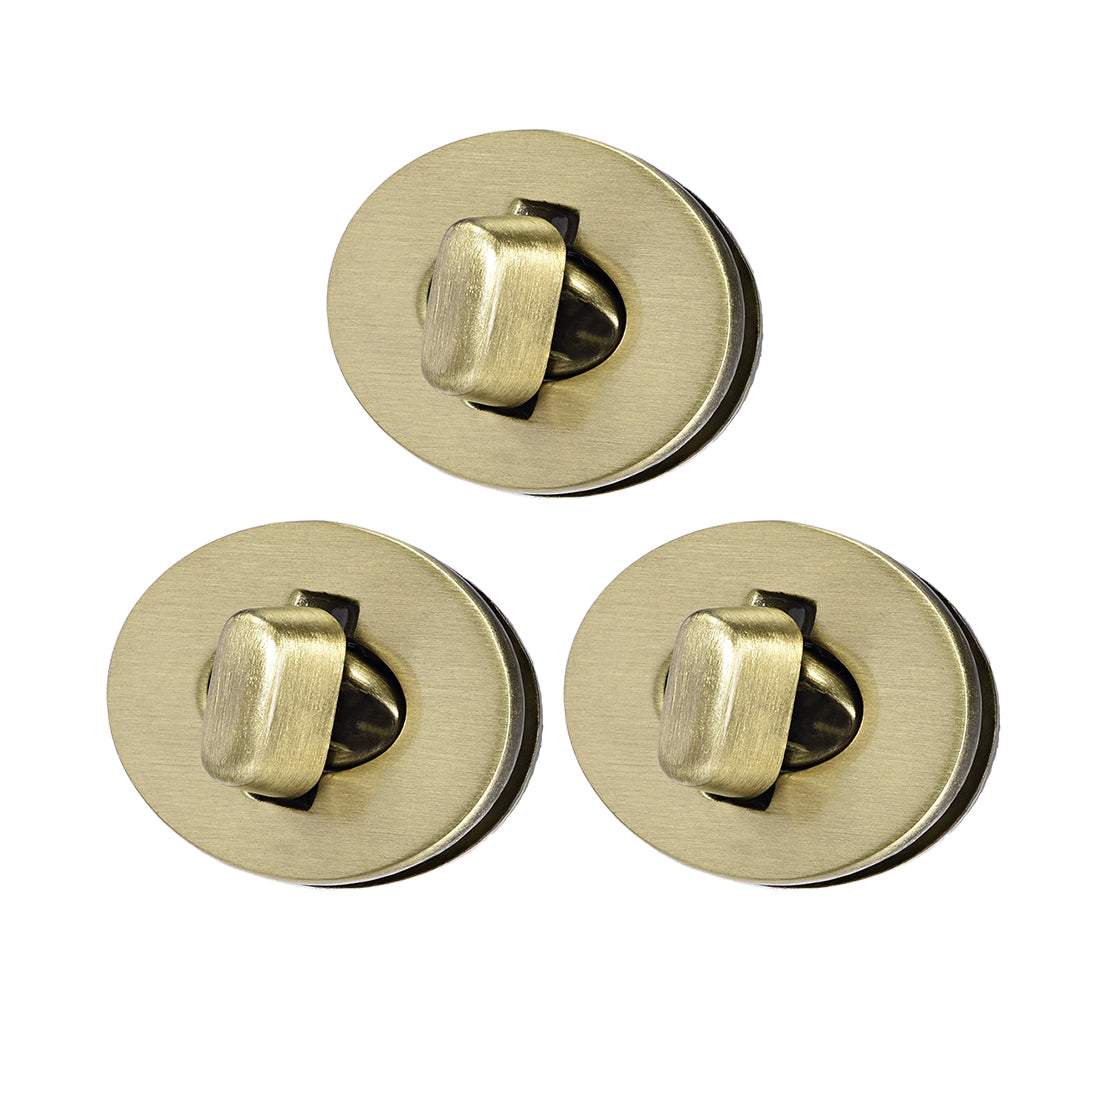 uxcell Uxcell 3 Sets Oval Purses Twist Lock 30mm x 24mm Clutches Closures for DIY Bag Making - Brussed Brass